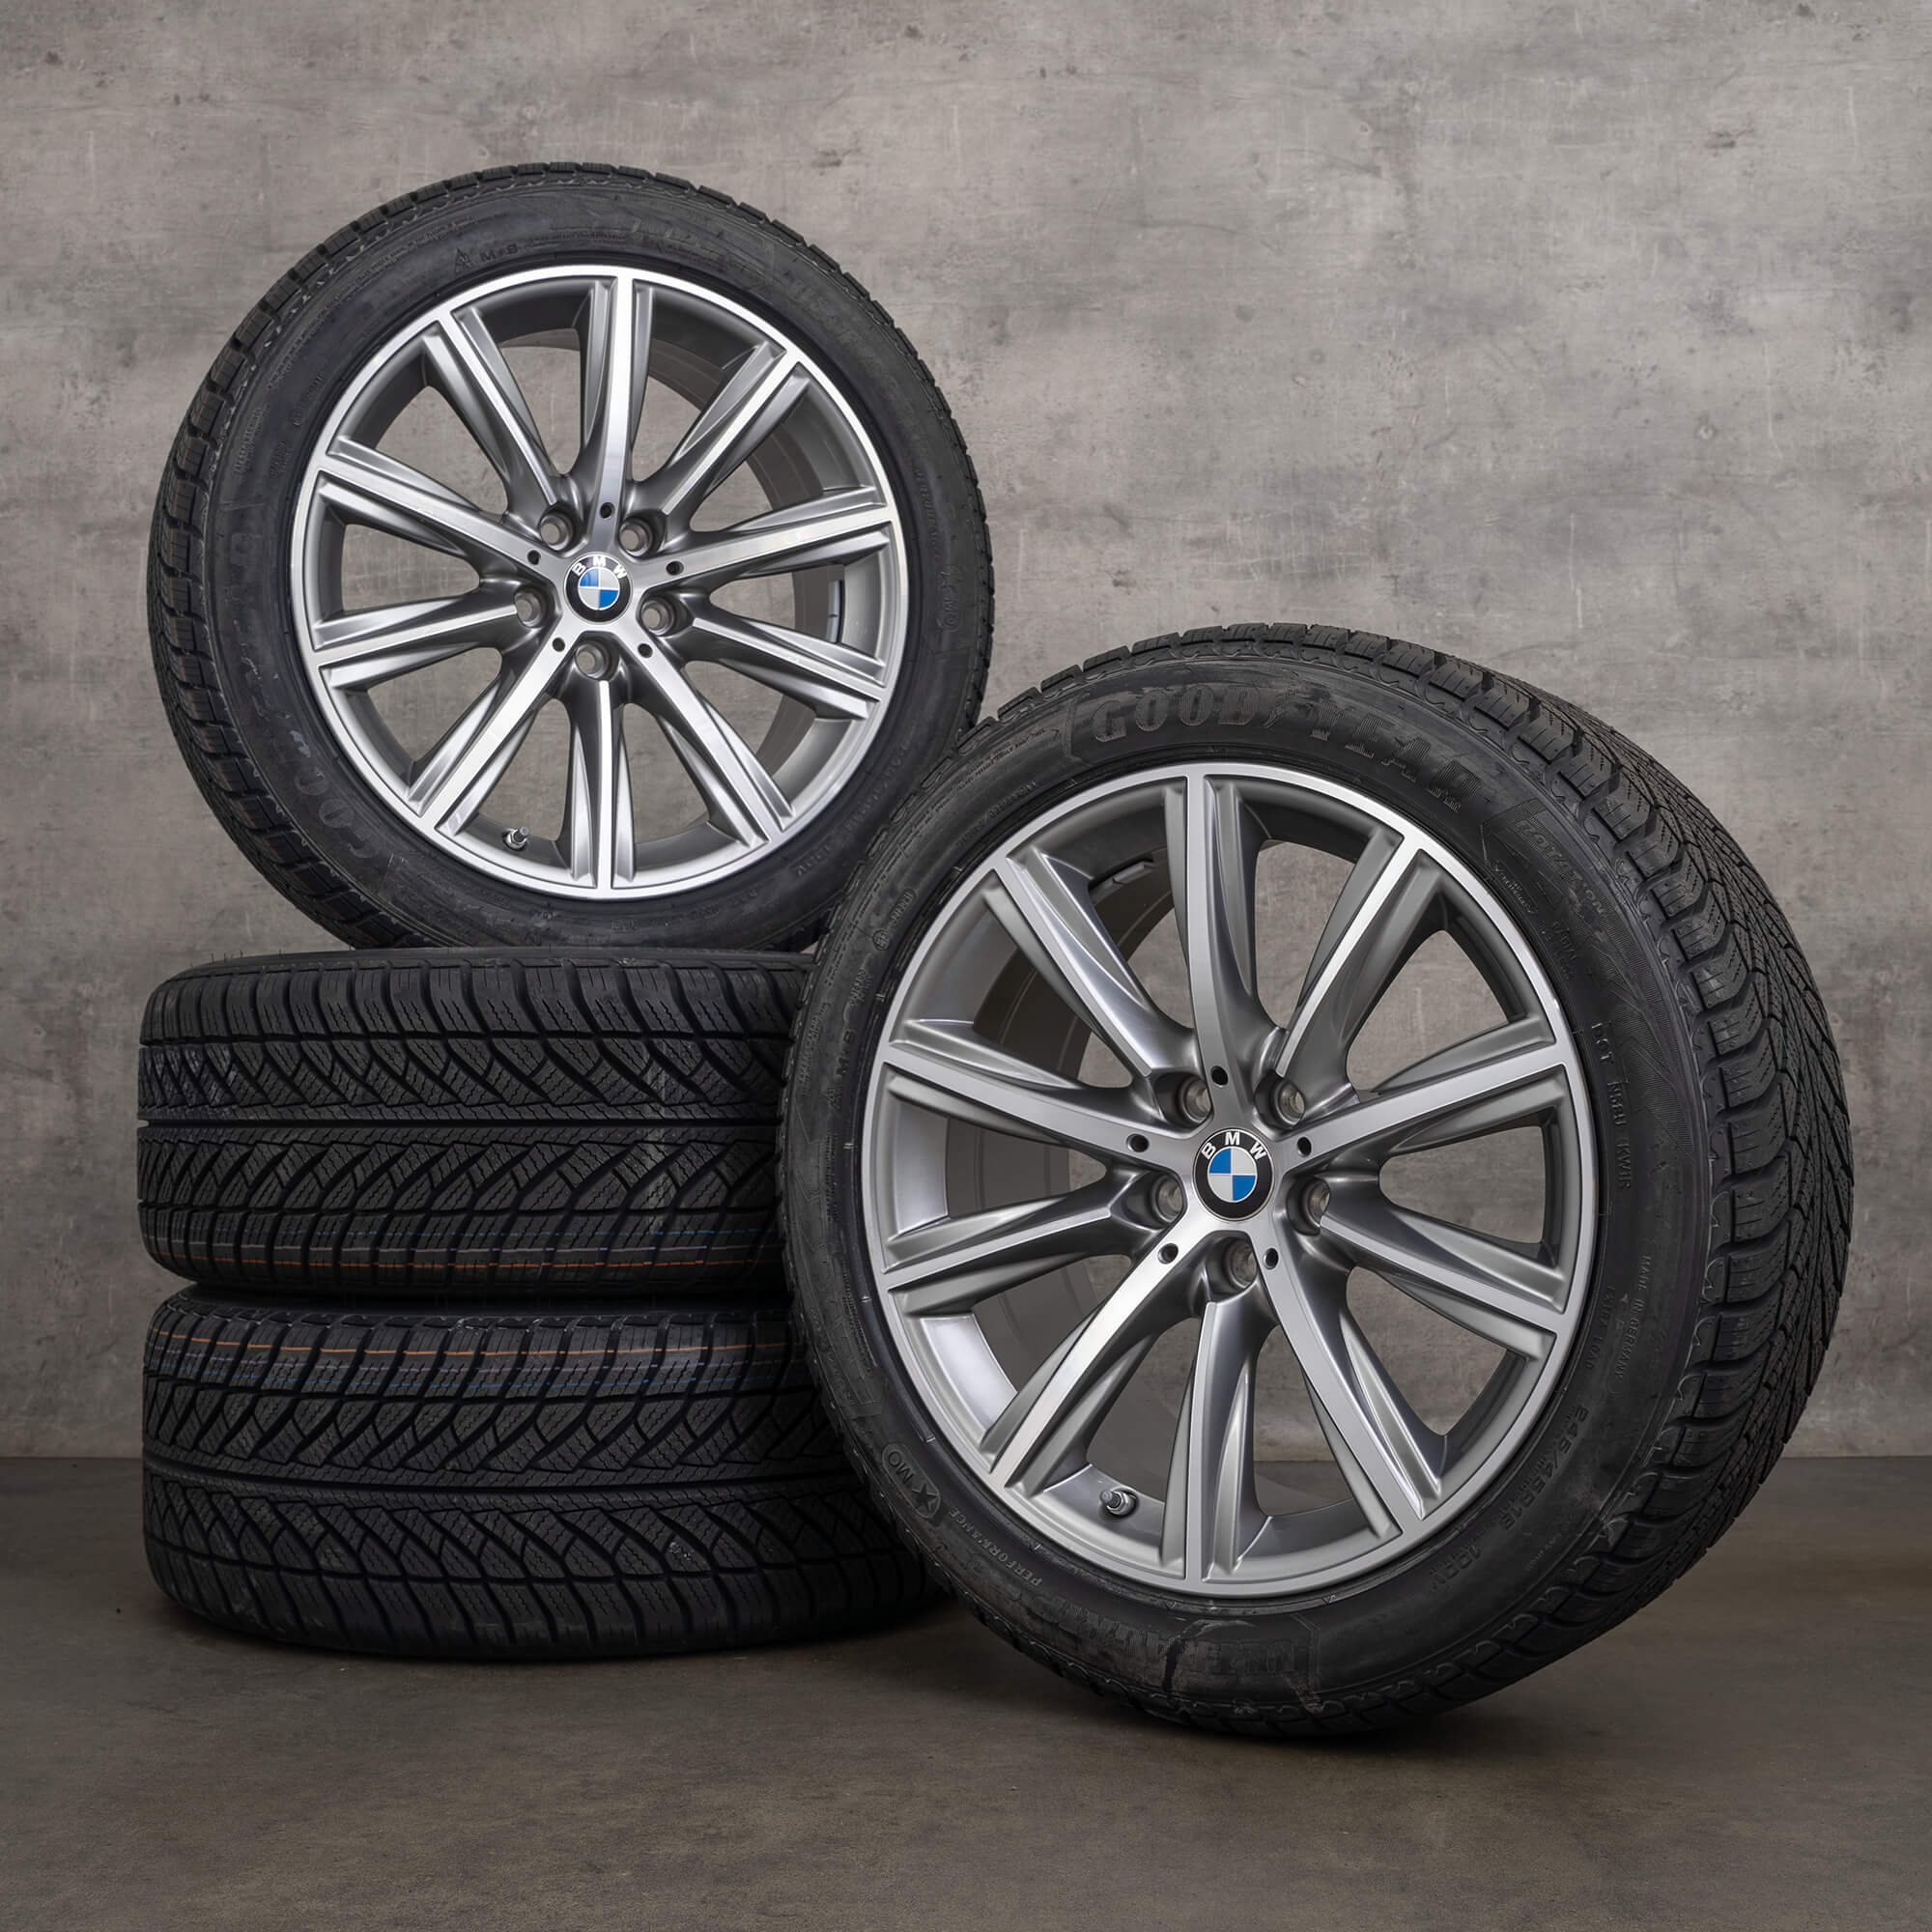 OEM BMW 5 Series G30 G31 18 inch winter tires rims styling 684 6874441